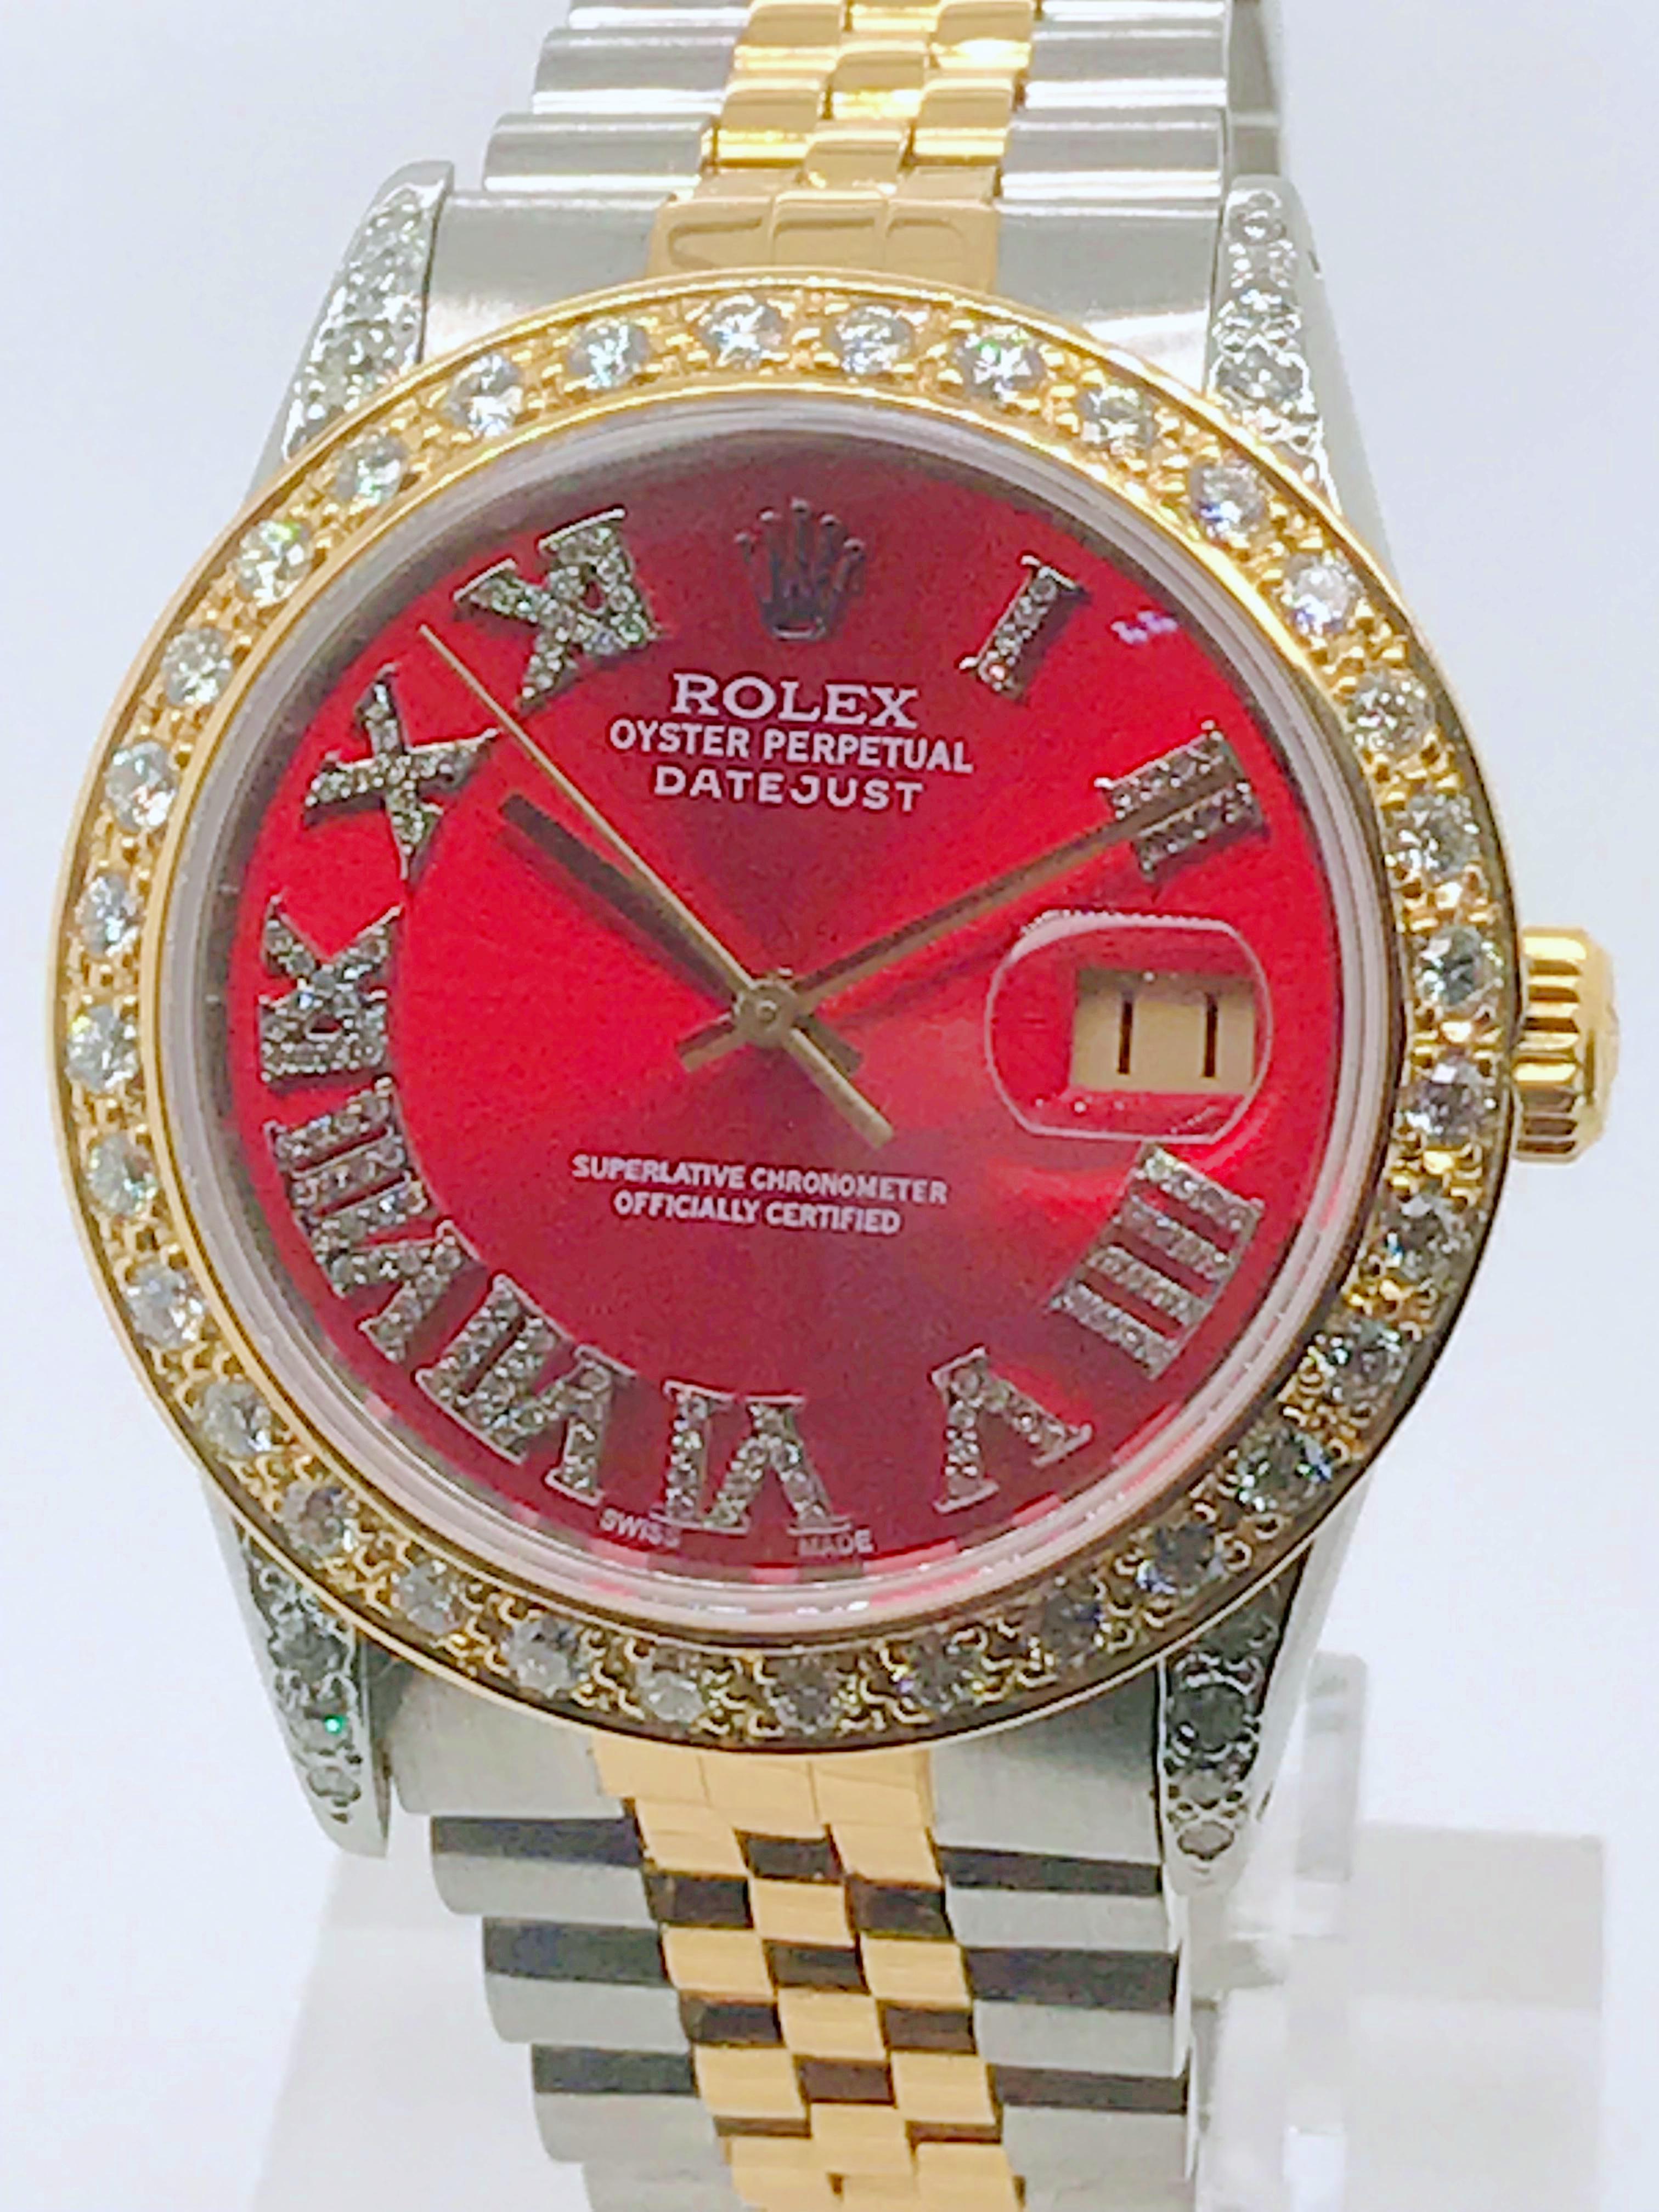 This 18 karat yellow gold and stainless steel Rolex is 36mm is on a Jubilee style link bracelet and features diamond accents on the dial, bezel, and lugs. Circa 1985

This timepiece has recently been serviced by a Rolex Certified Watchmaker.